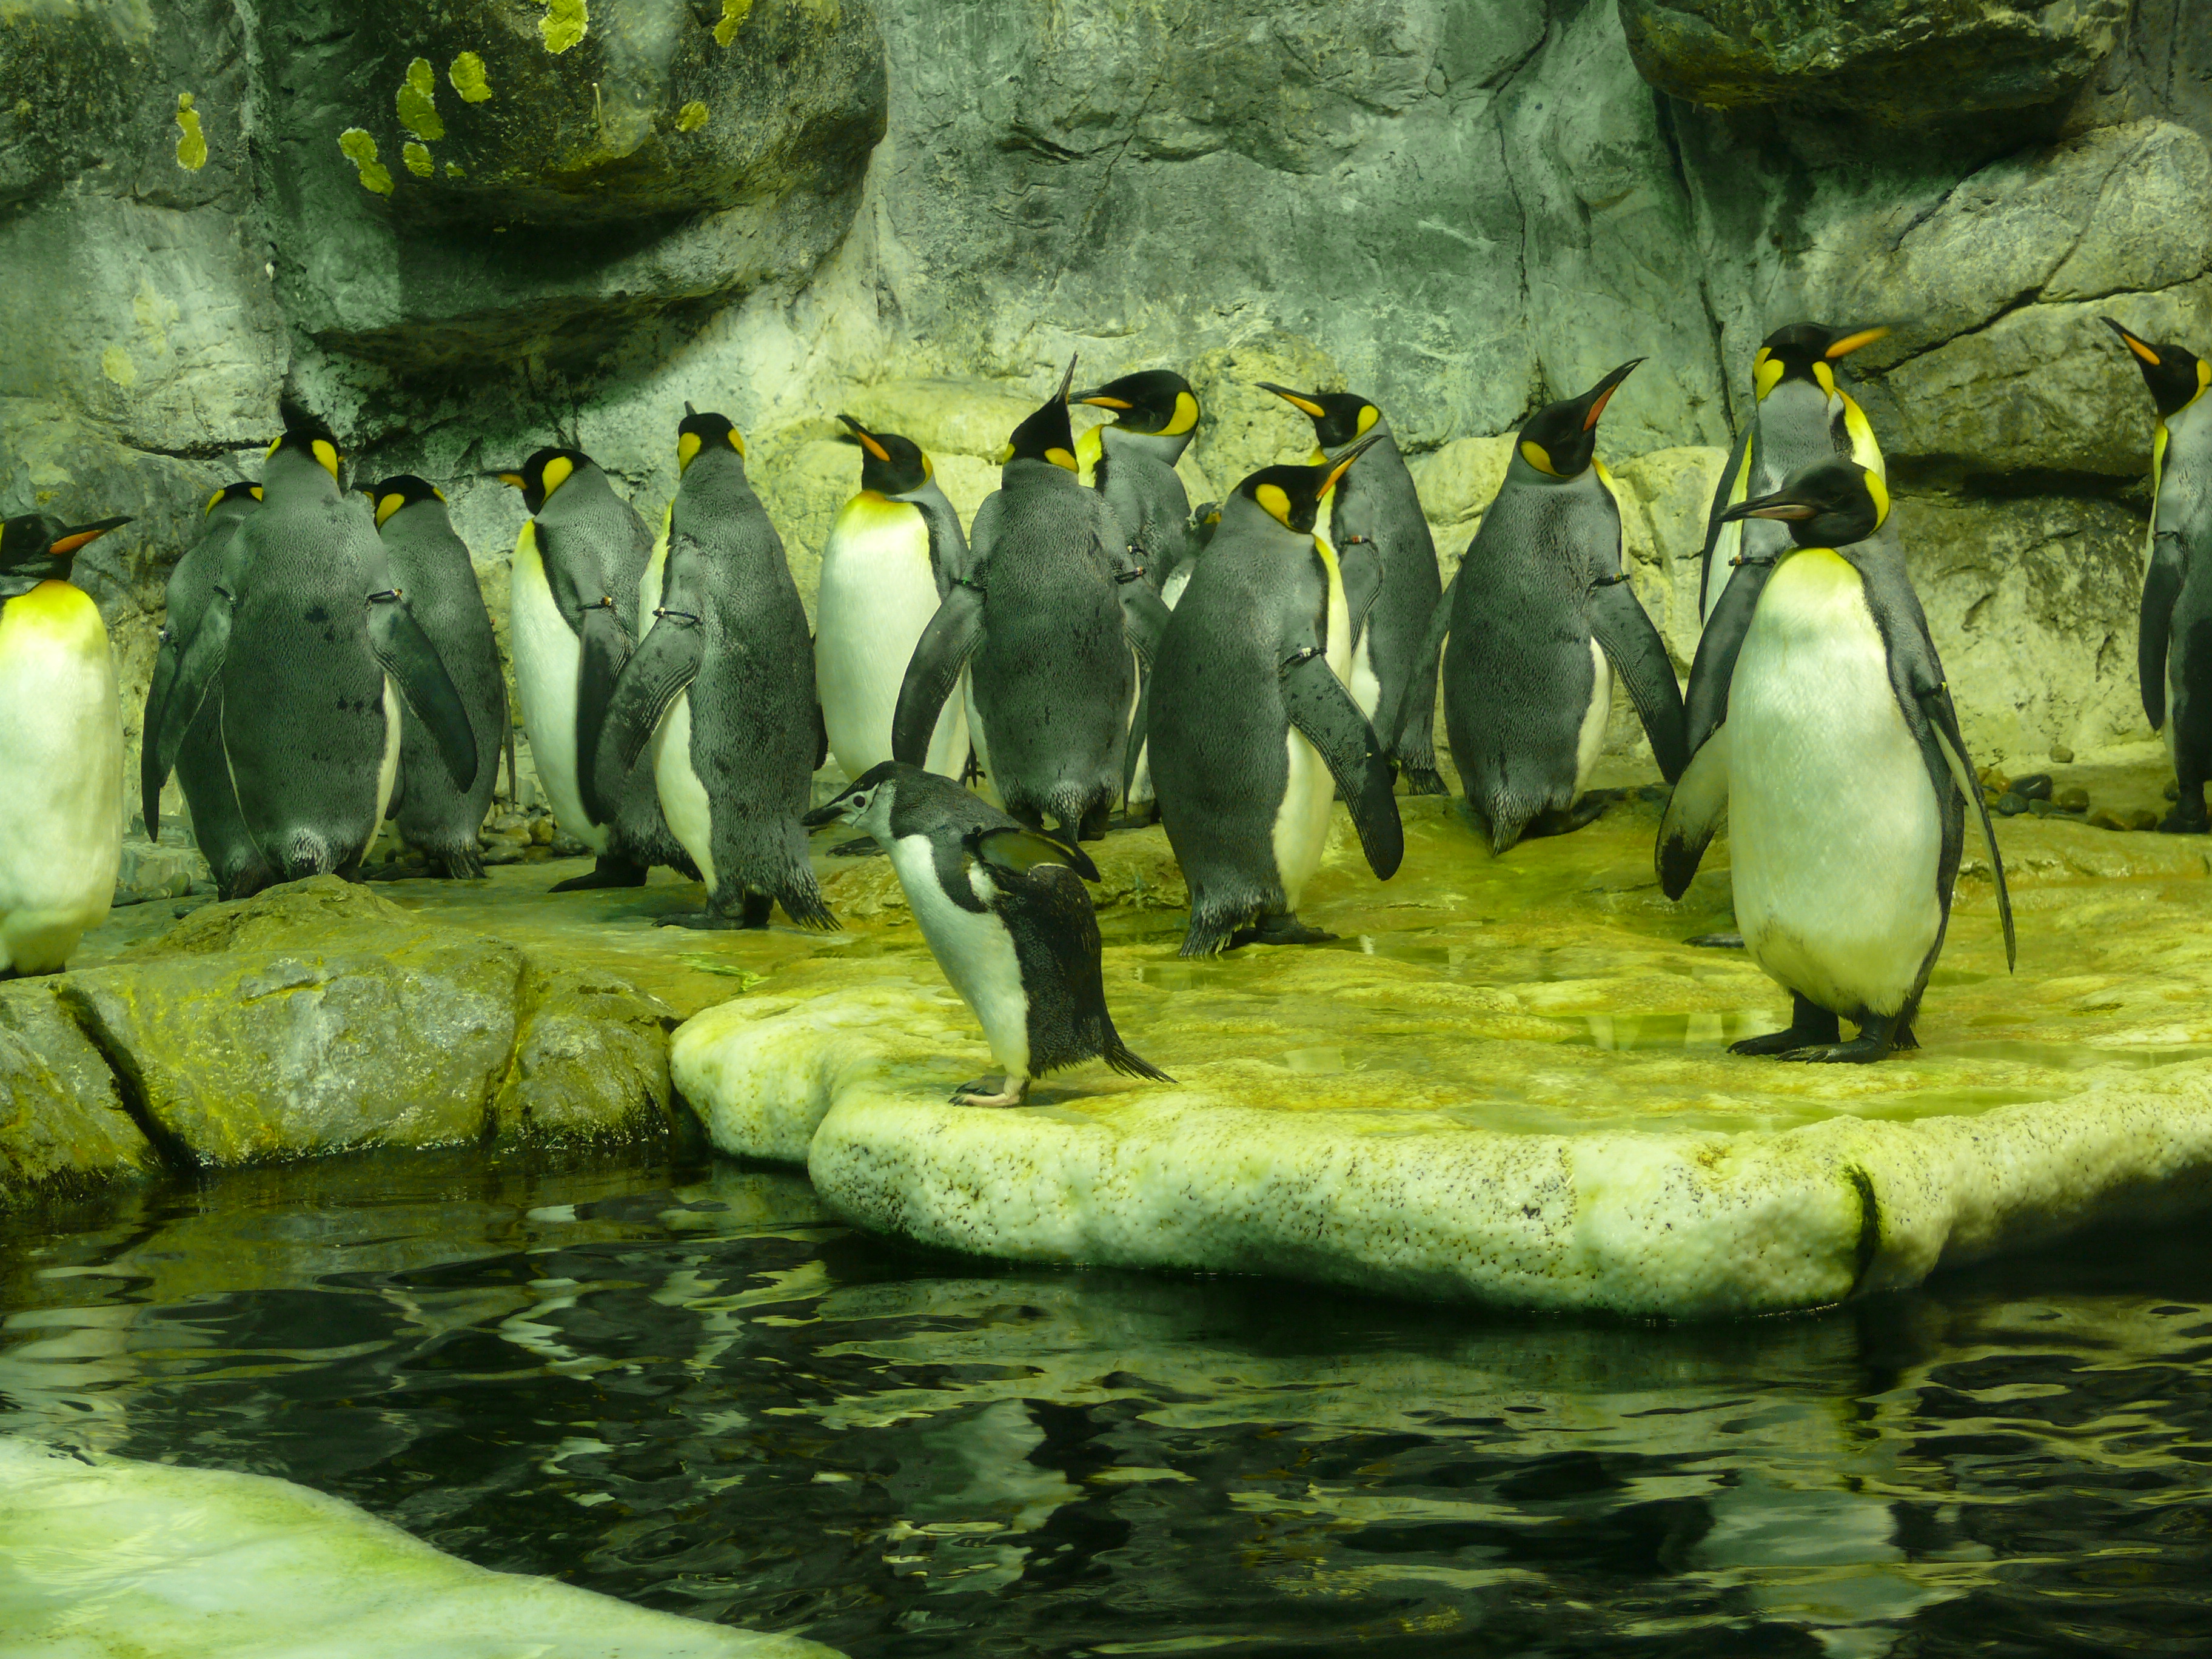 Penguins On Display At The Moody Gardens Aquarium Pics4learning